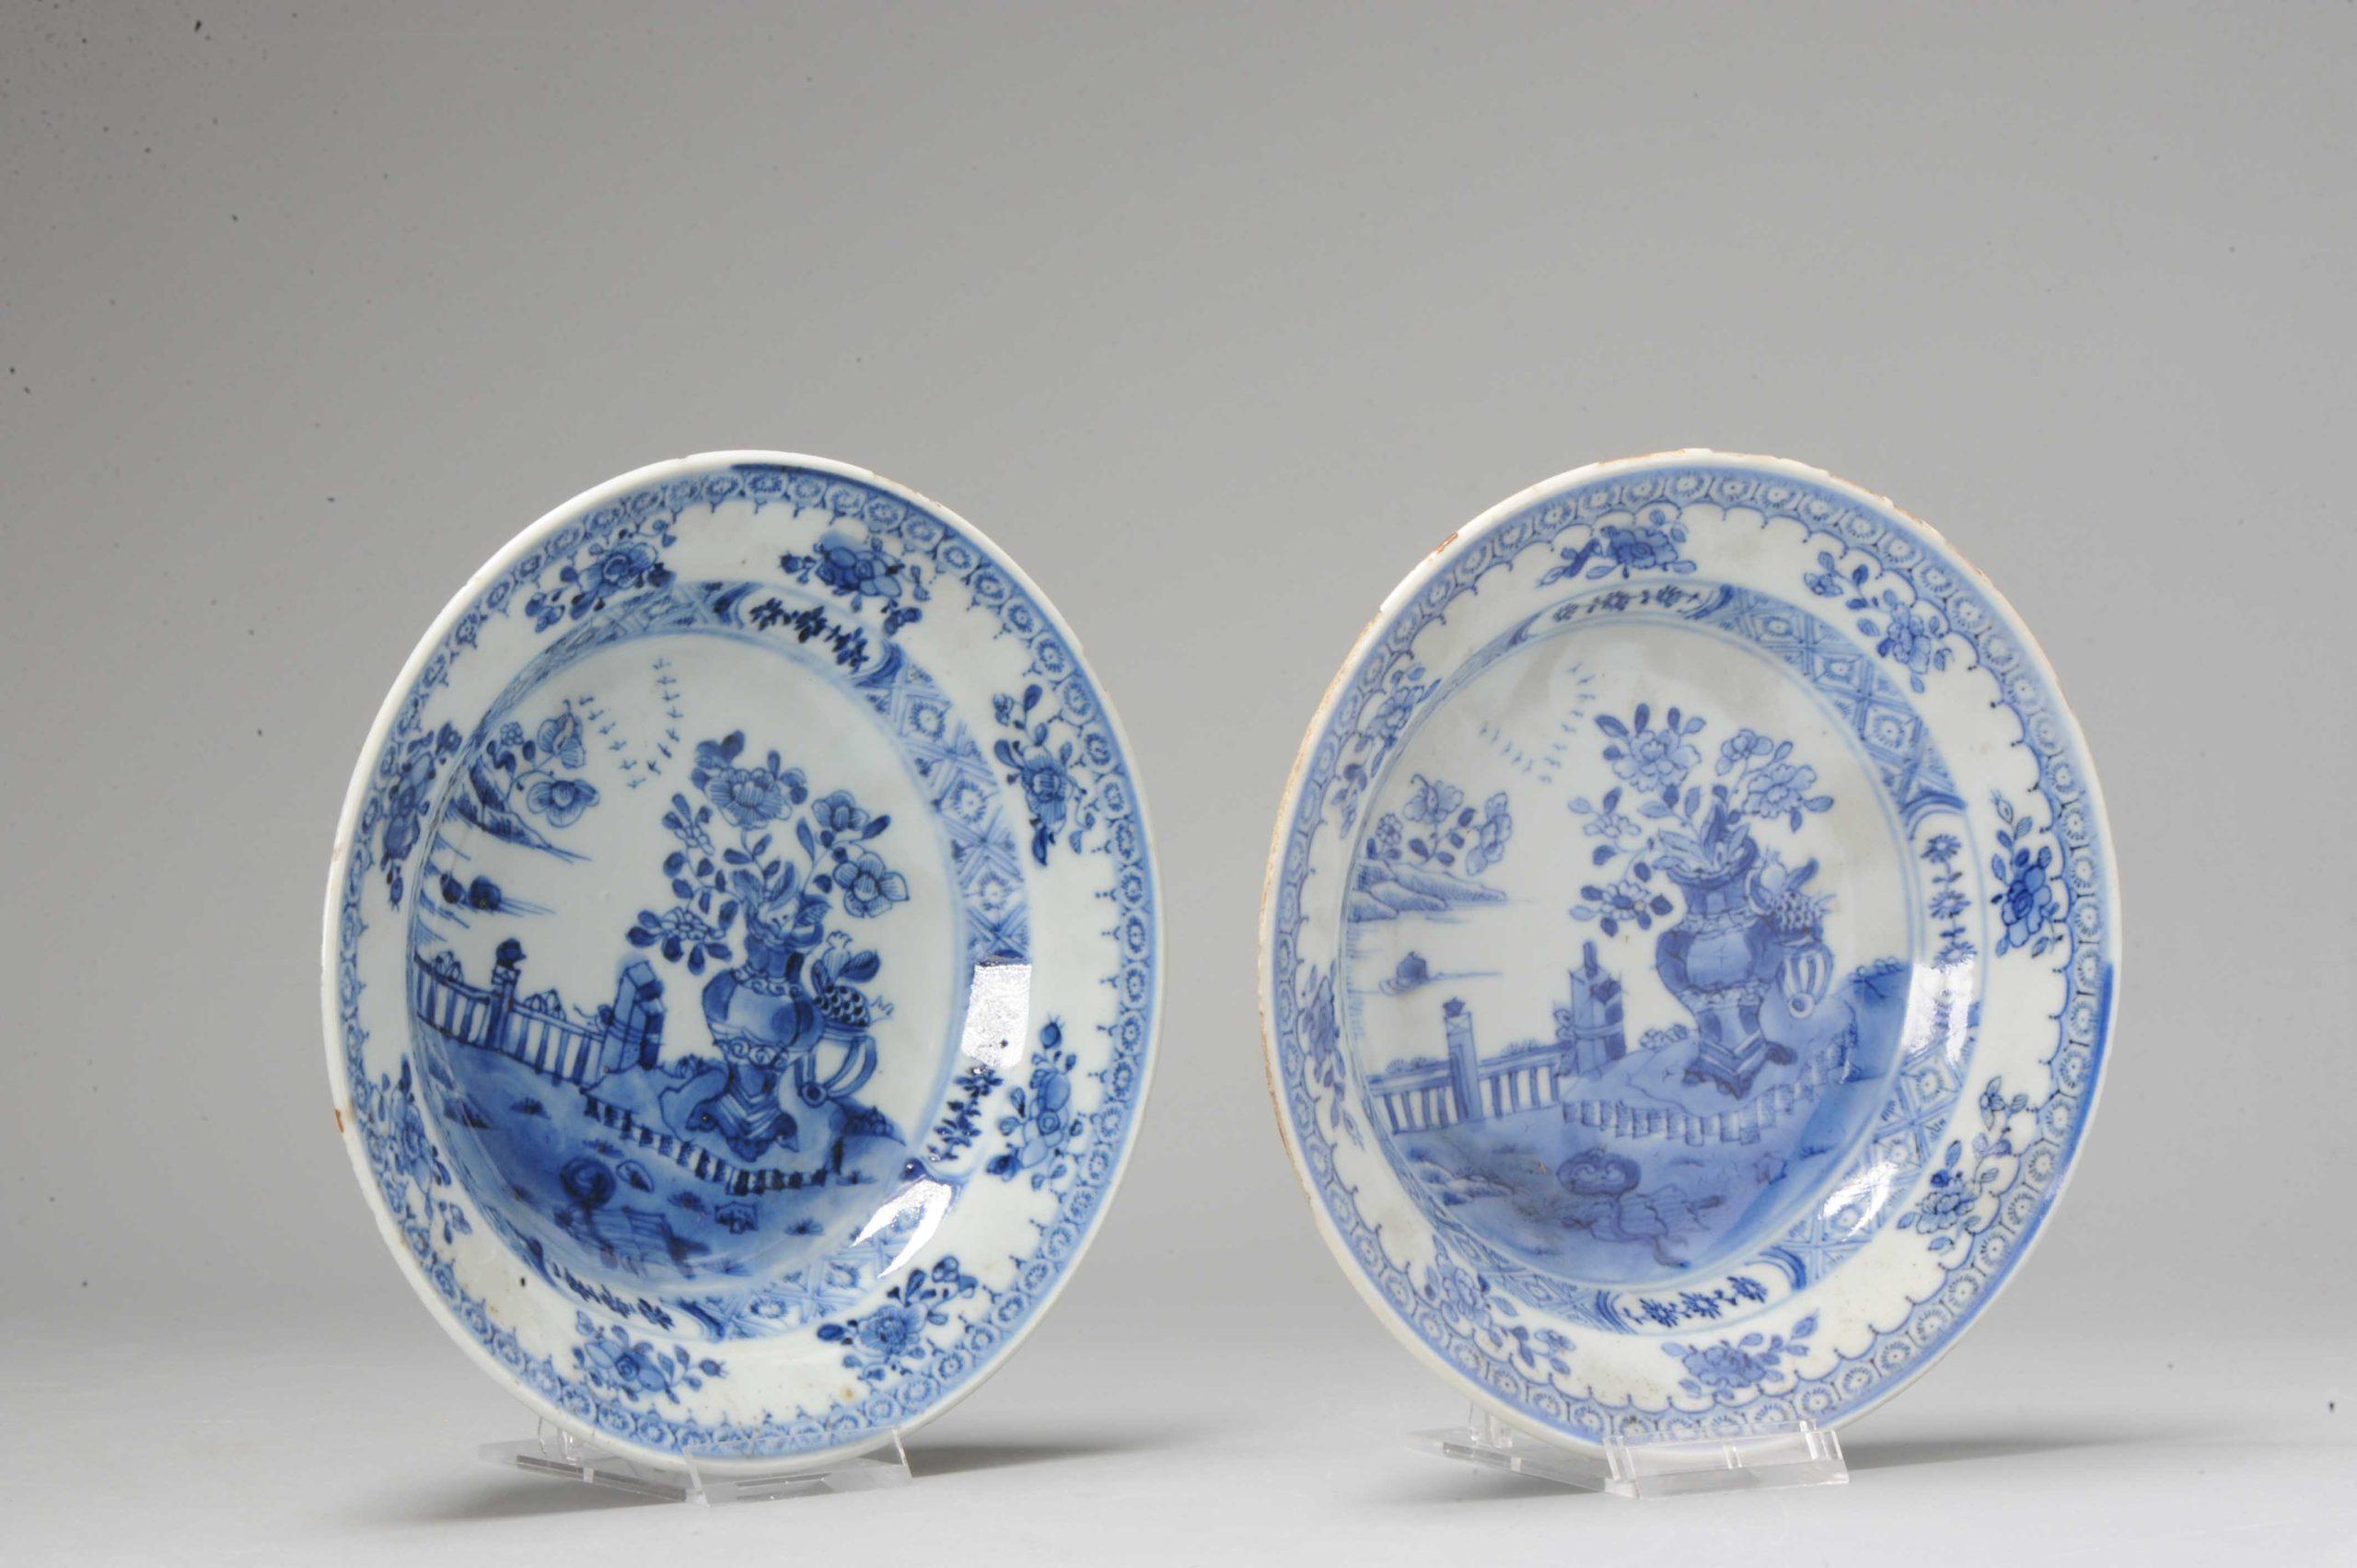 Lovely porridge plate with flowers.

Additional information:
Material: Porcelain & Pottery
Type: Plates
Category: Blue & White
Emperor: Kangxi (1661-1722), Qianlong (1735-1796)
Region of Origin: China
Period: 18th century Qing (1661 -